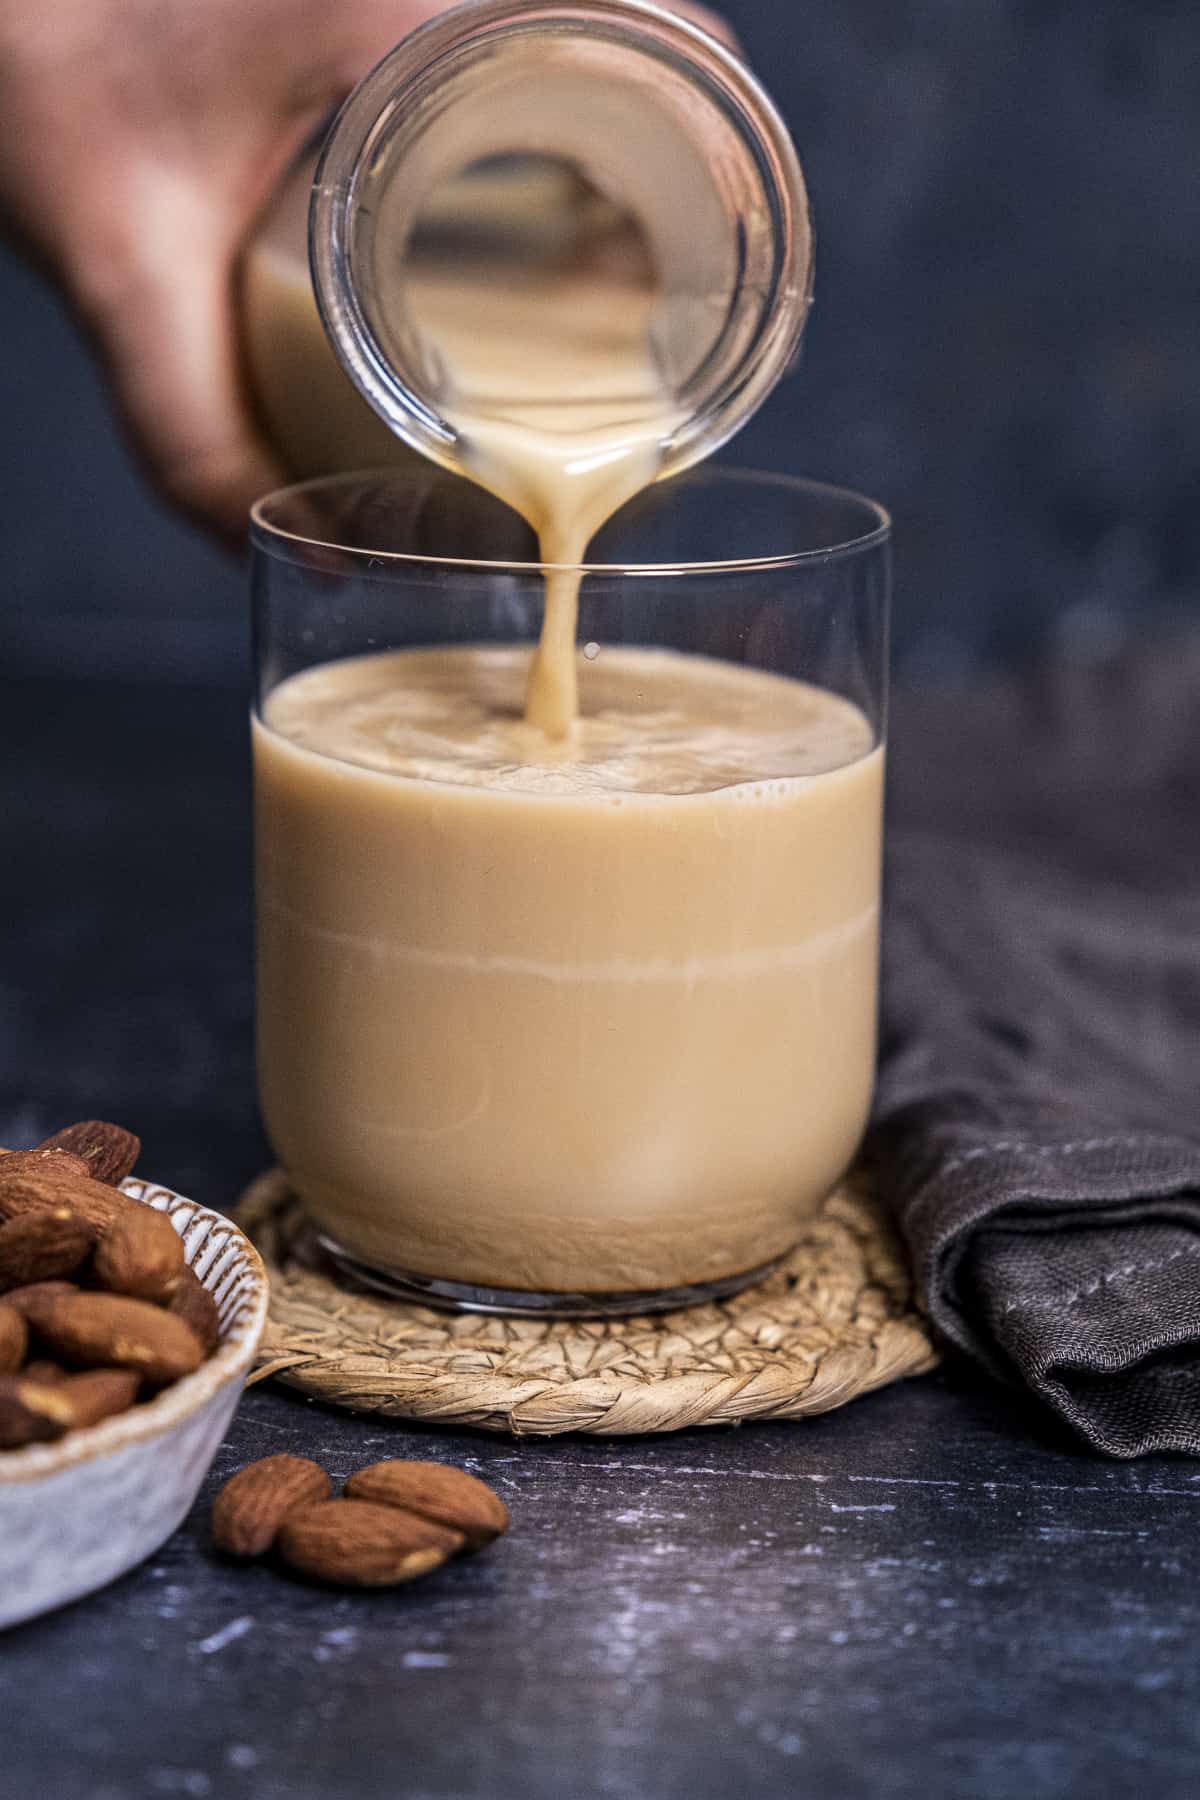 A hand pouring roasted almond milk into a glass and whole almonds on the side.